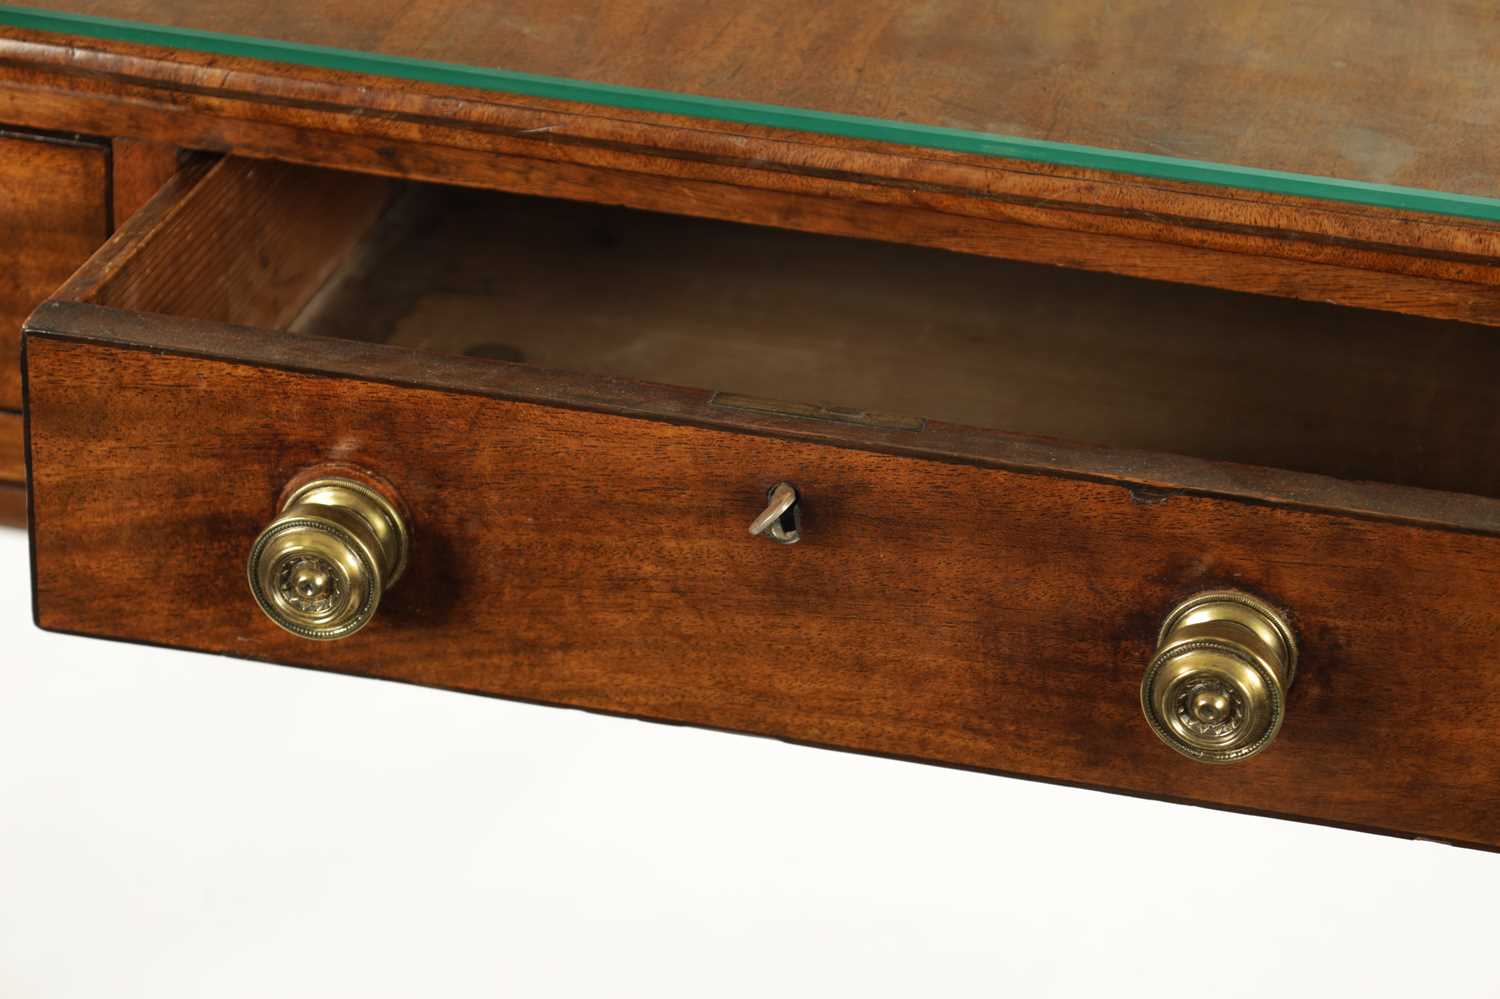 A REGENCY MAHOGANY TWO DRAWER SOFA TABLE - Image 5 of 6